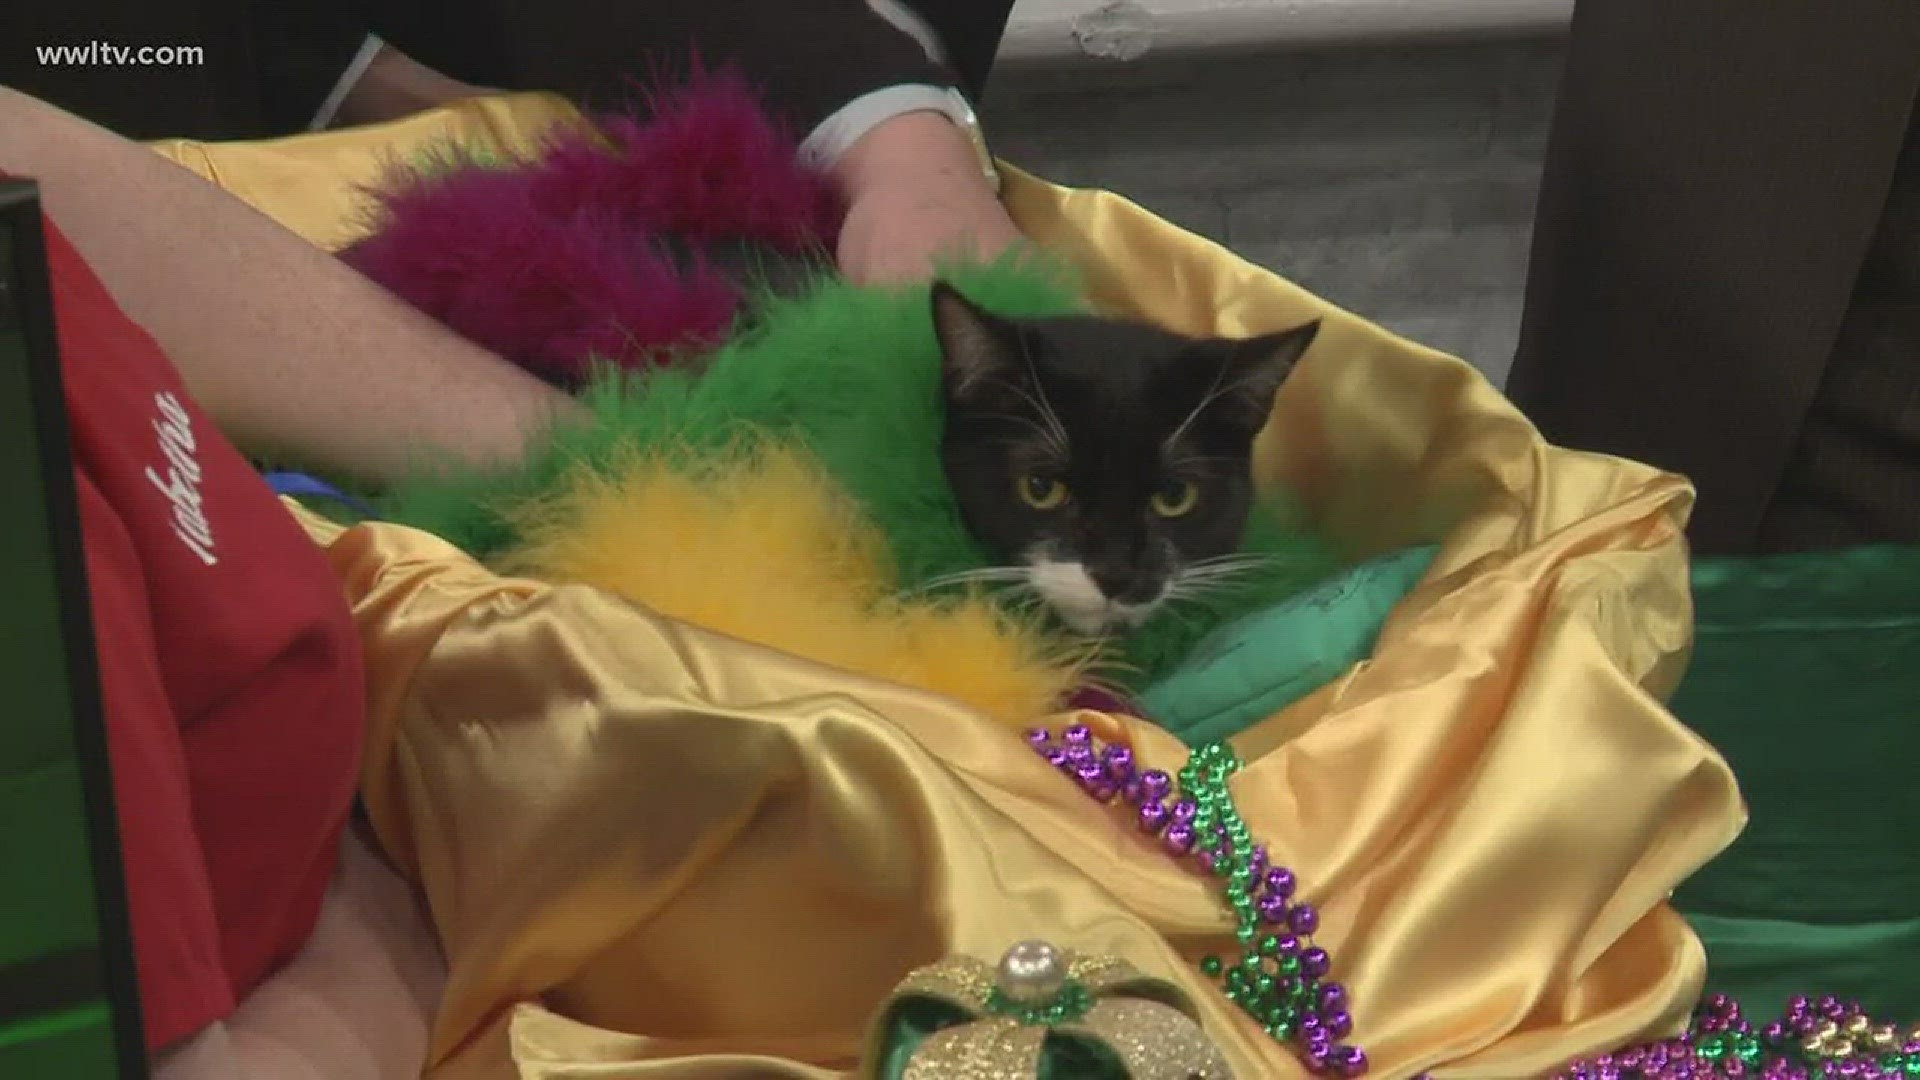 Dr. Mark Cousins introduces us to the feline royalty of Endymeow.